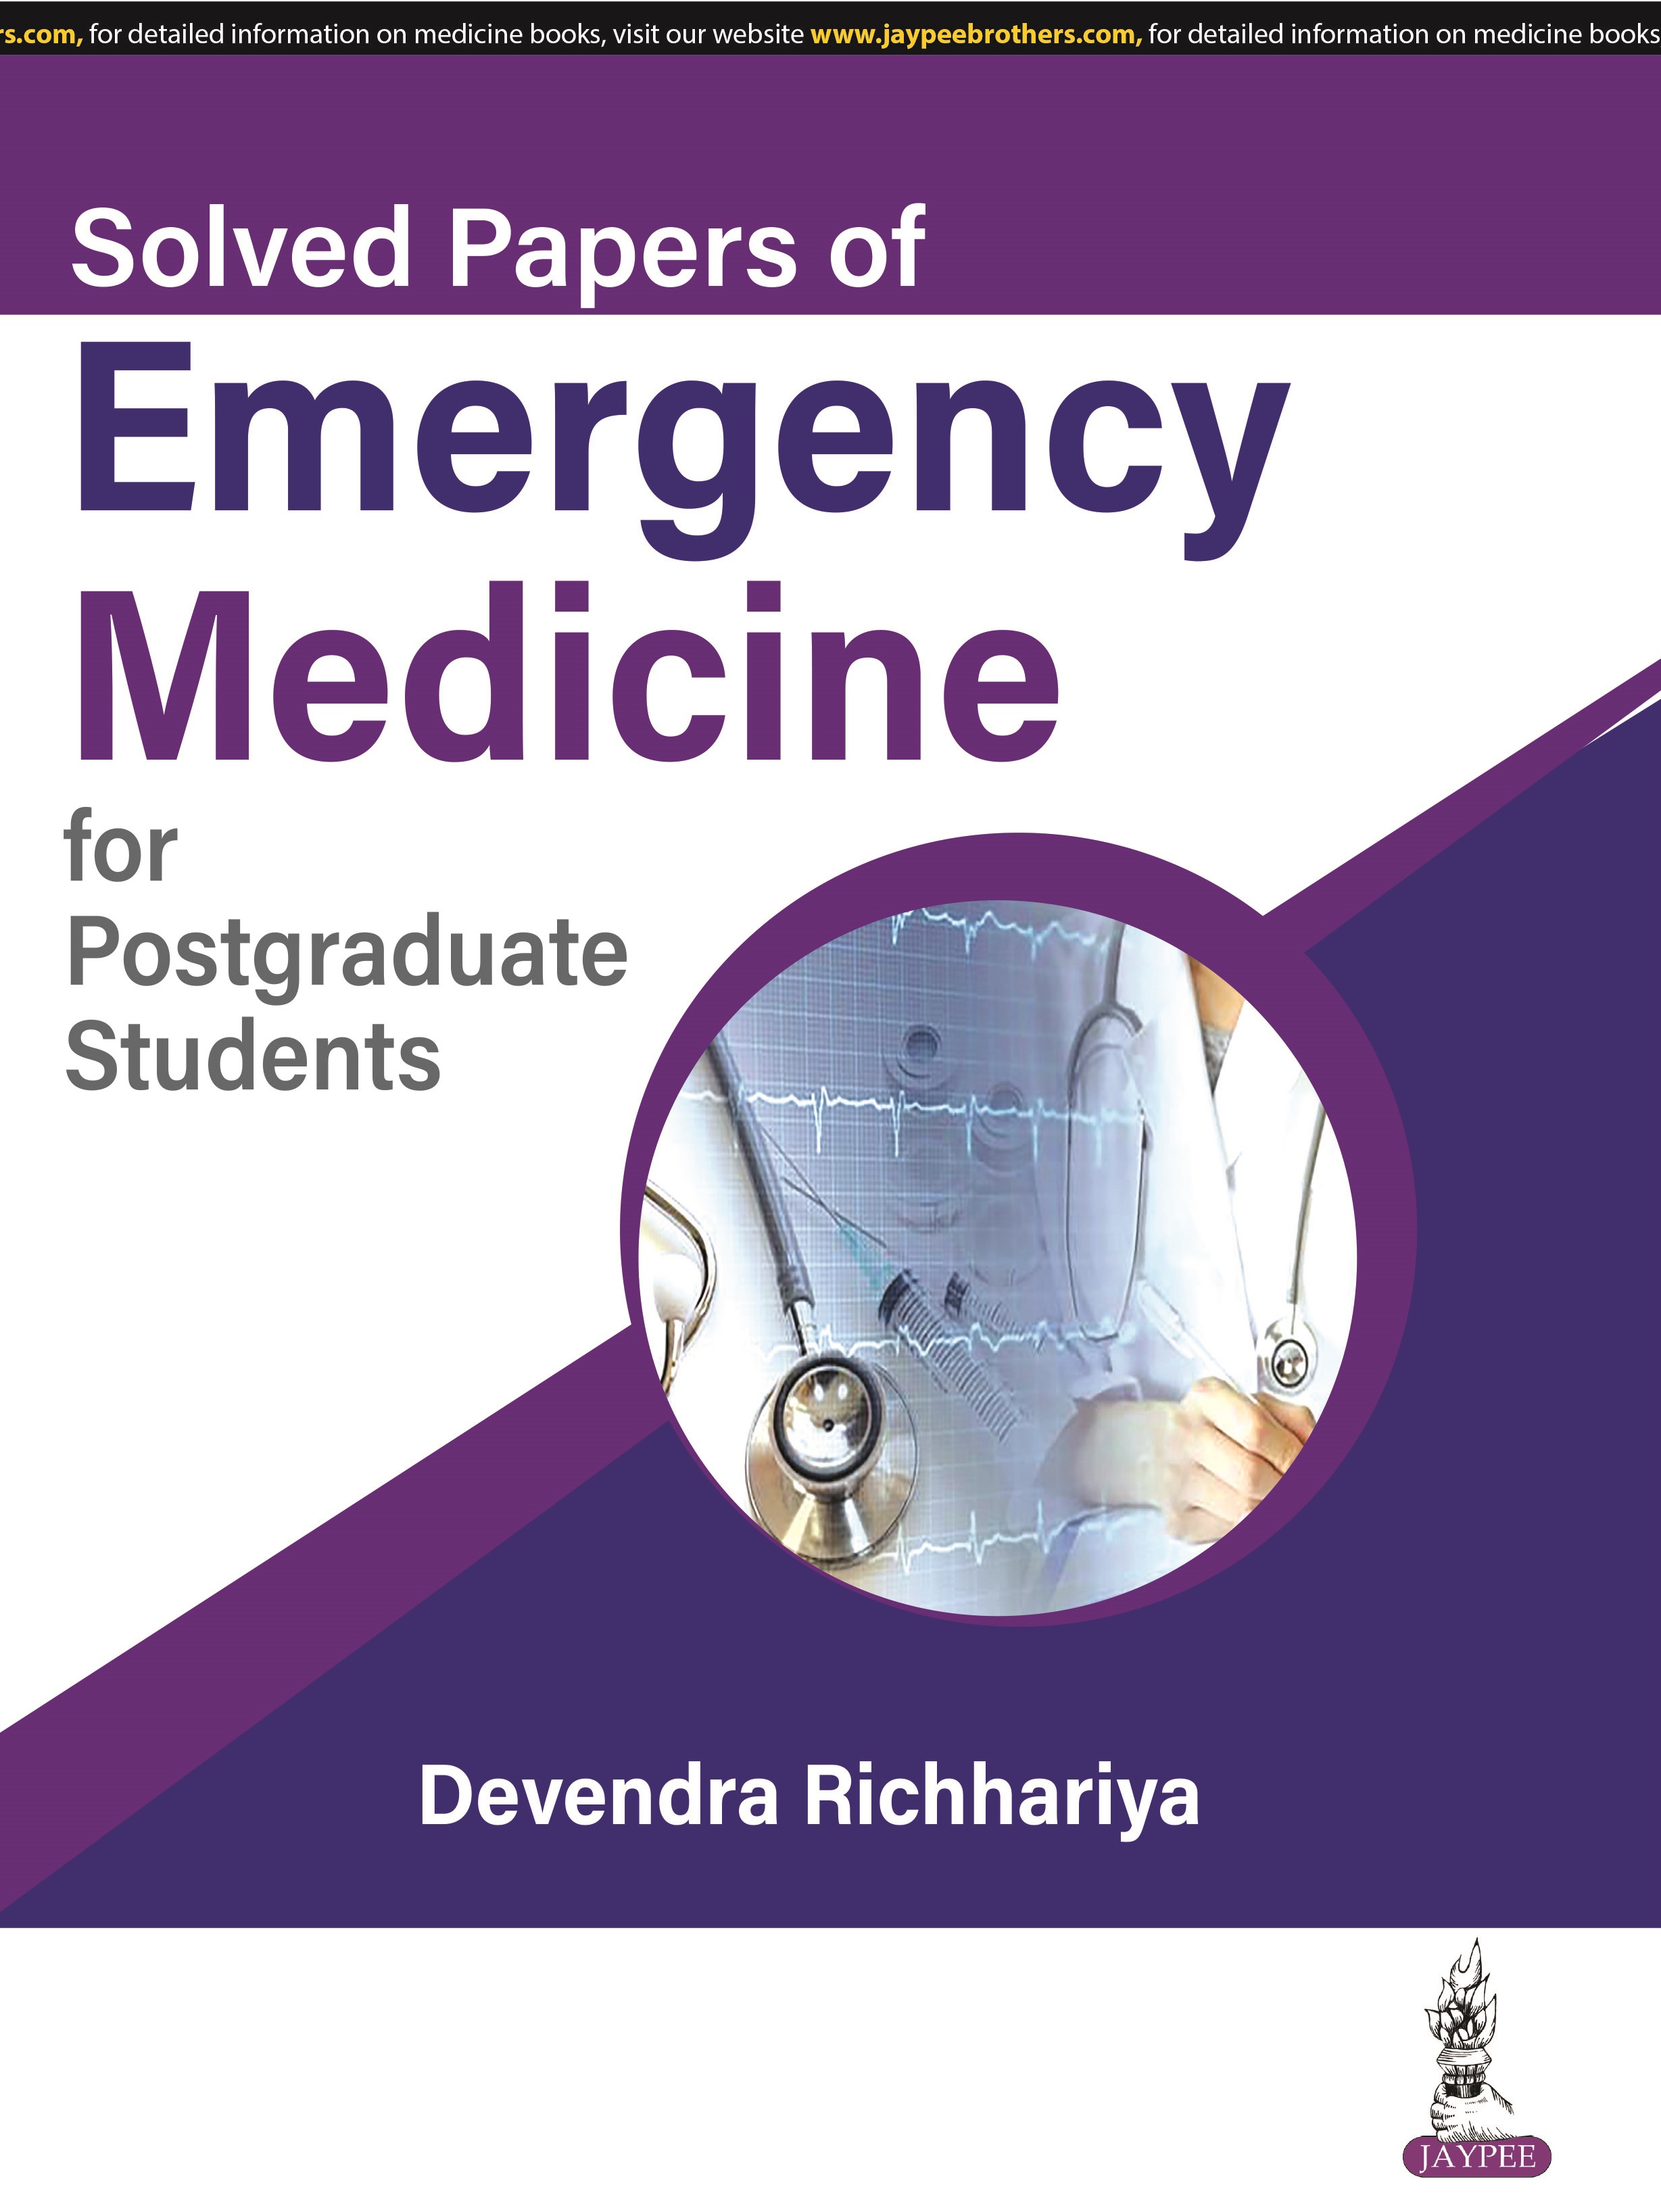 Solved Papers of Emergency Medicine for Postgraduate Students